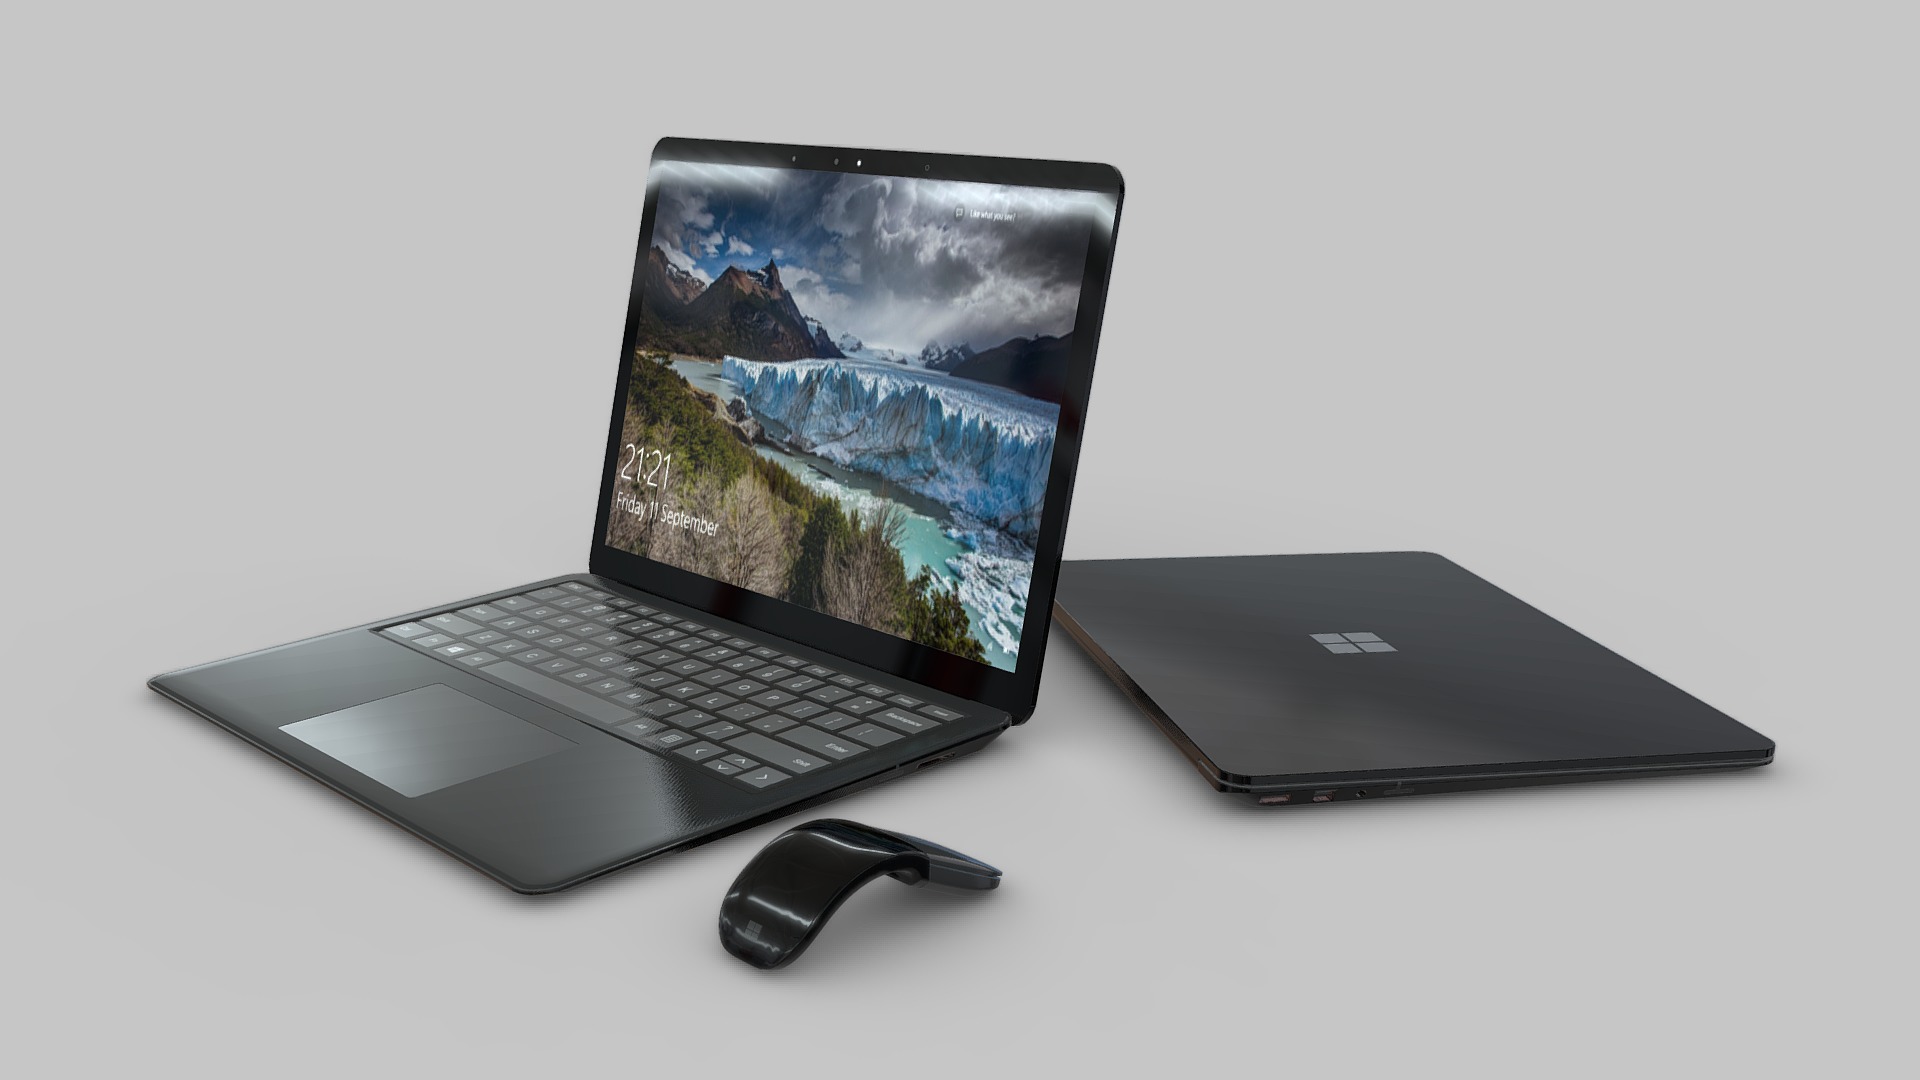 3D model Microsoft Surface Laptop - This is a 3D model of the Microsoft Surface Laptop. The 3D model is about a laptop and a mouse.